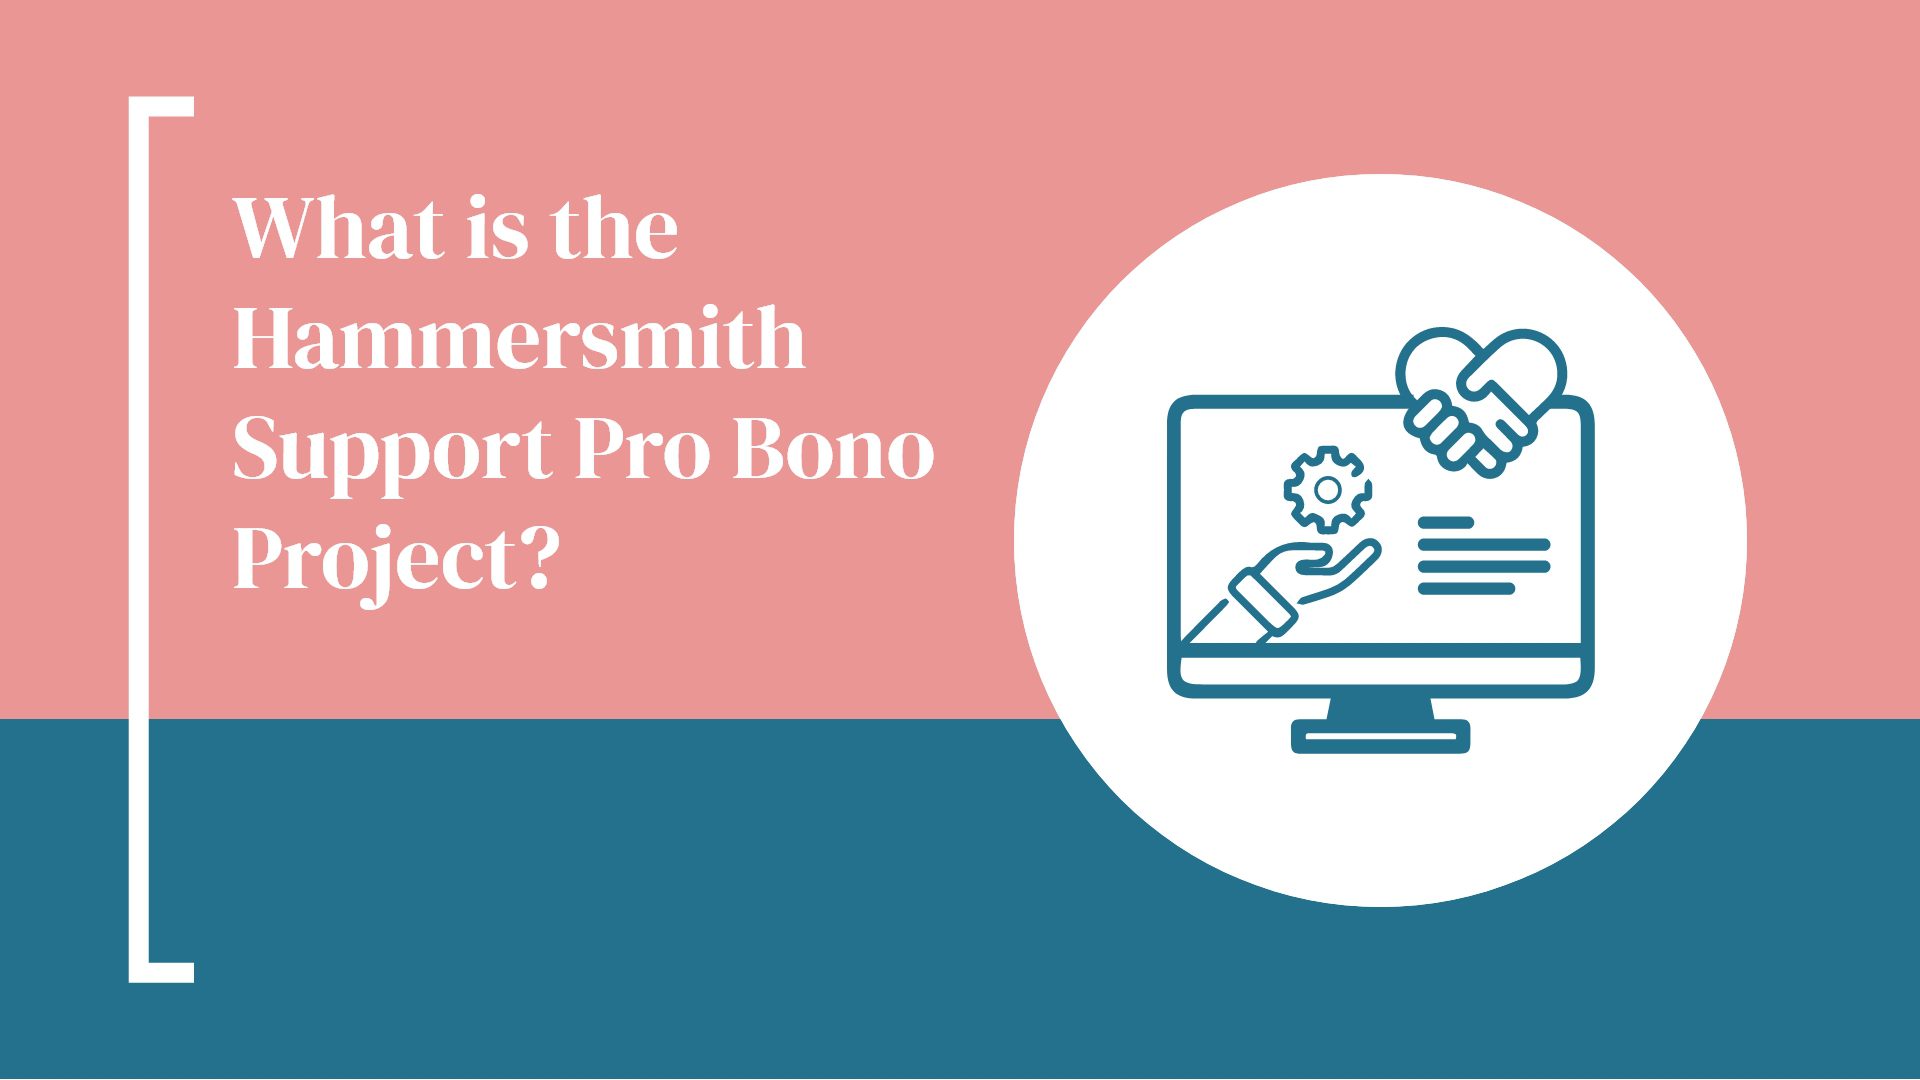 What is the Hammersmith Support Pro Bono Project?